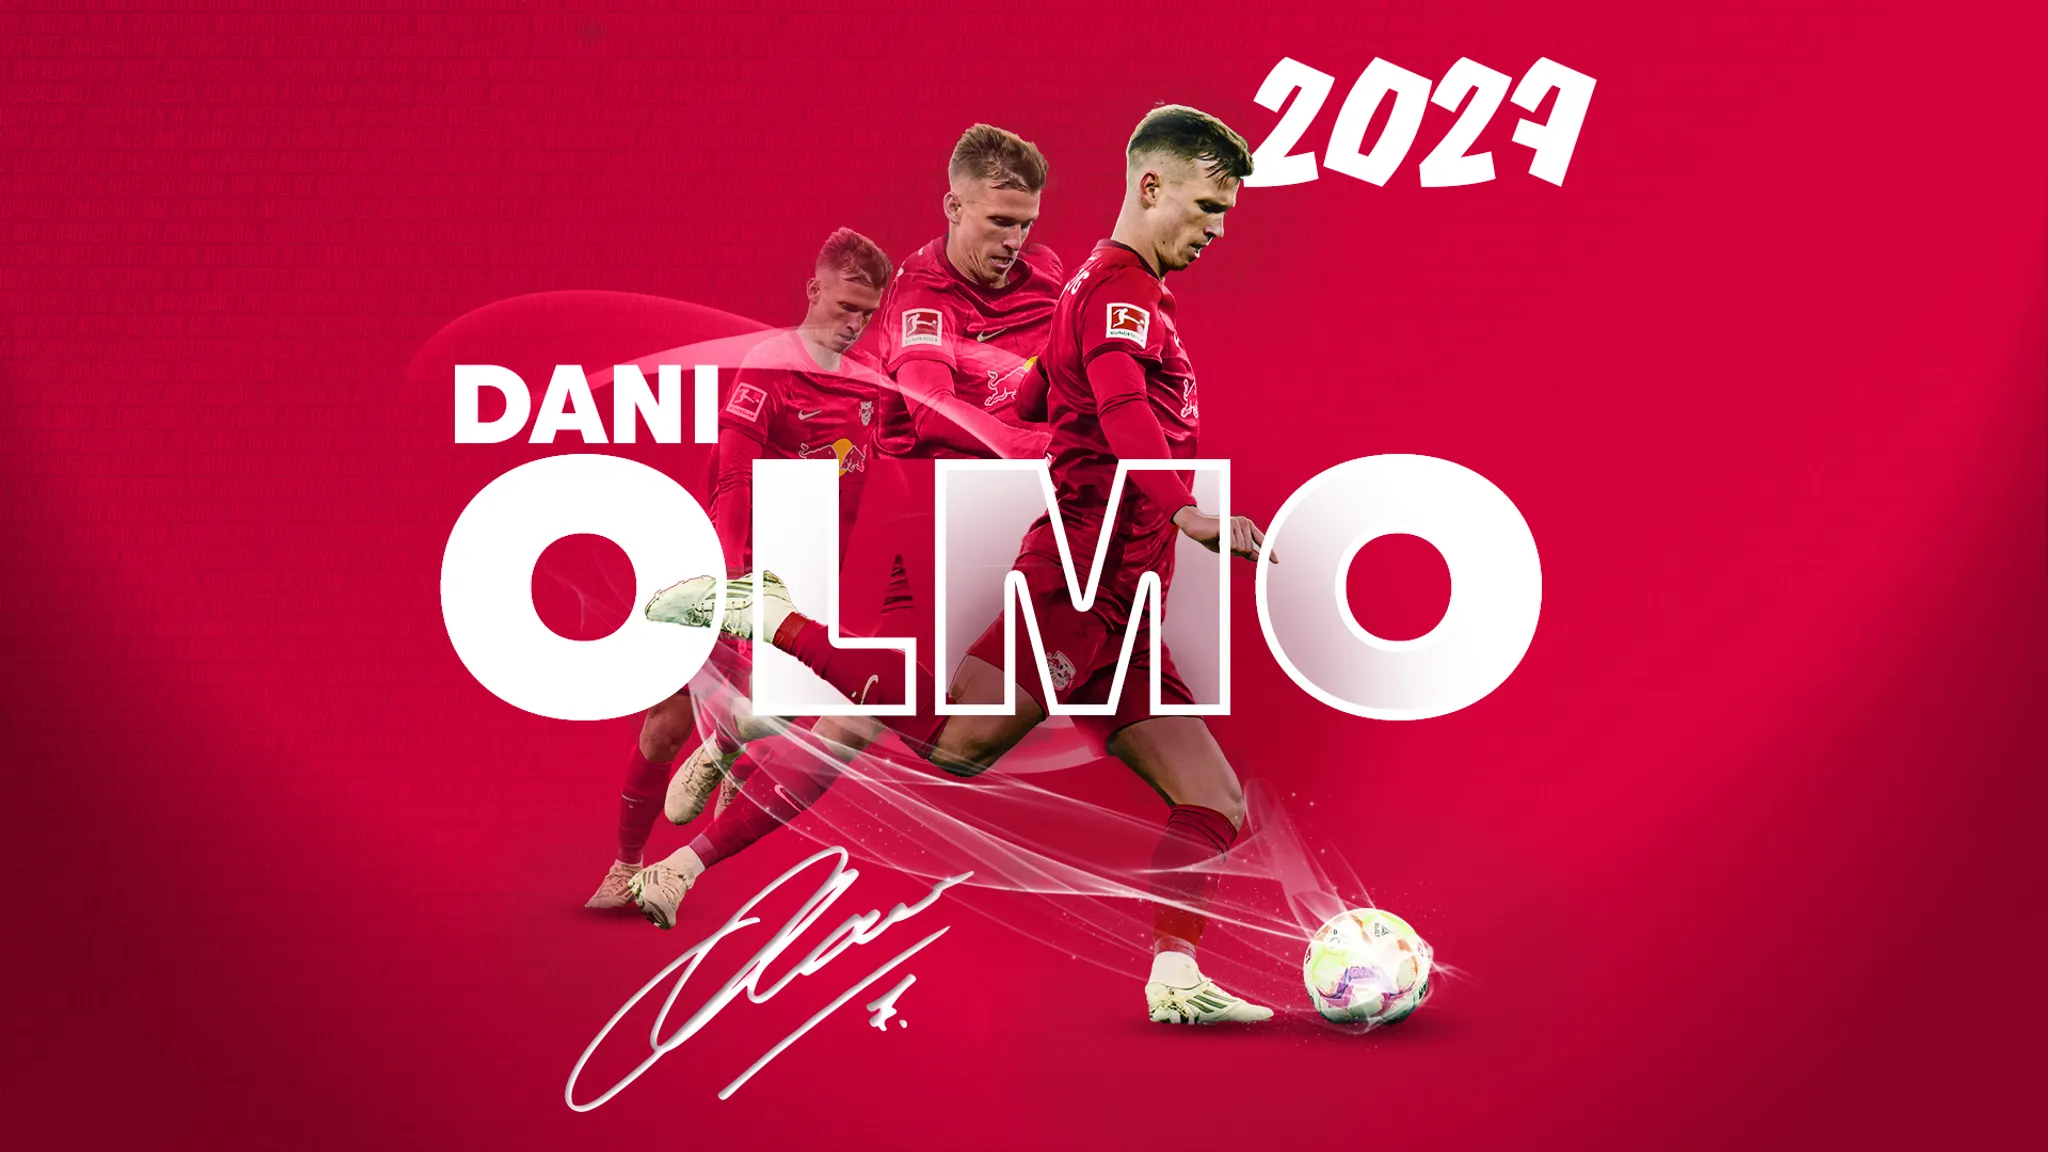 Dani Olmo signs a contract extension